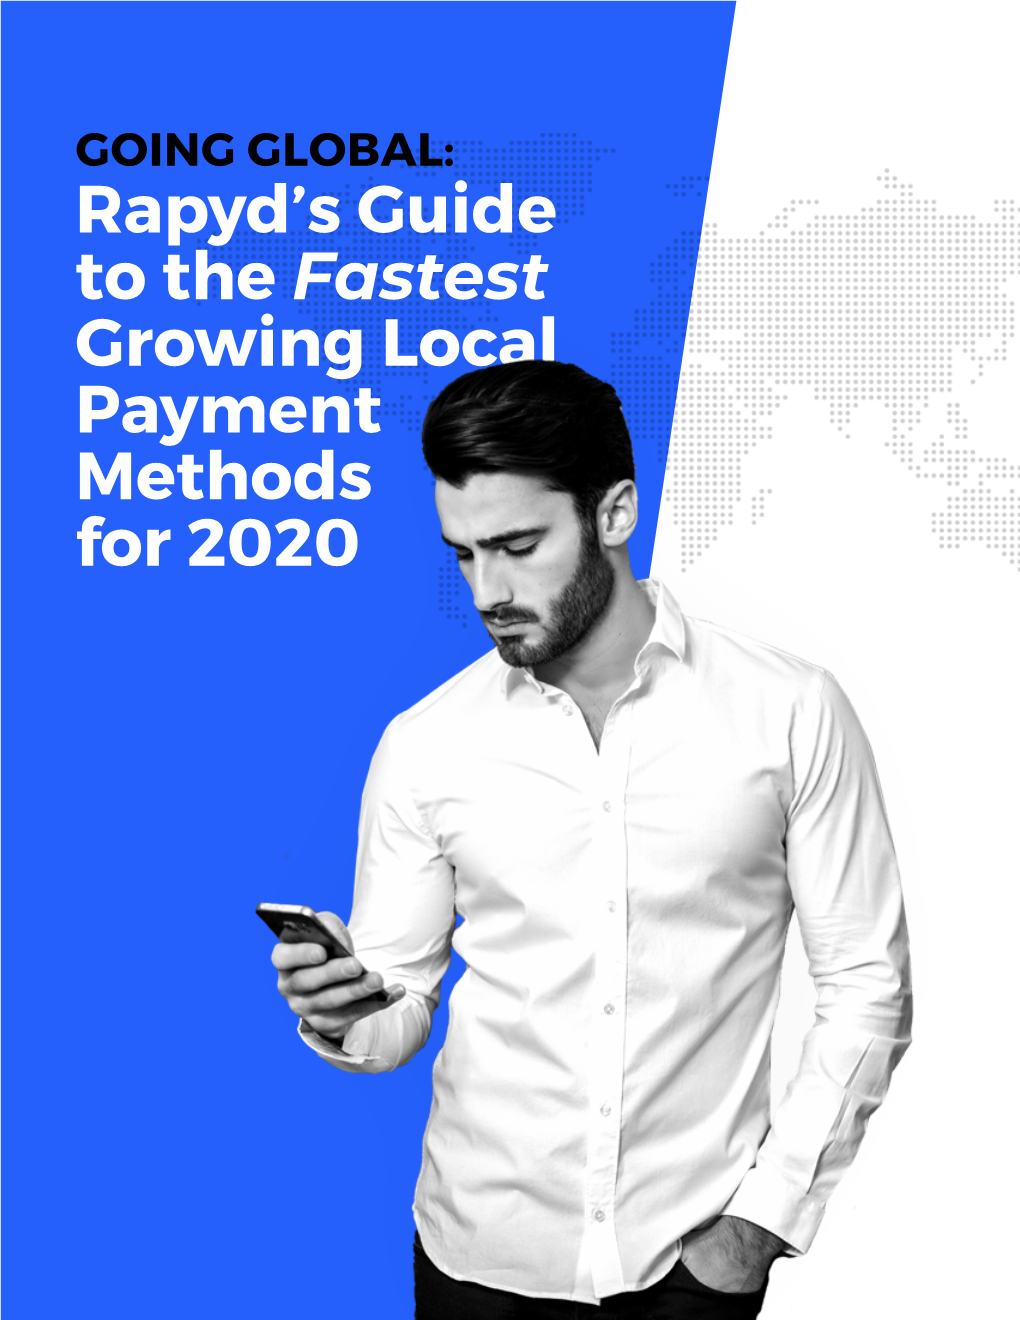 Rapyd's Guide to the Fastest Growing Local Payment Methods for 2020